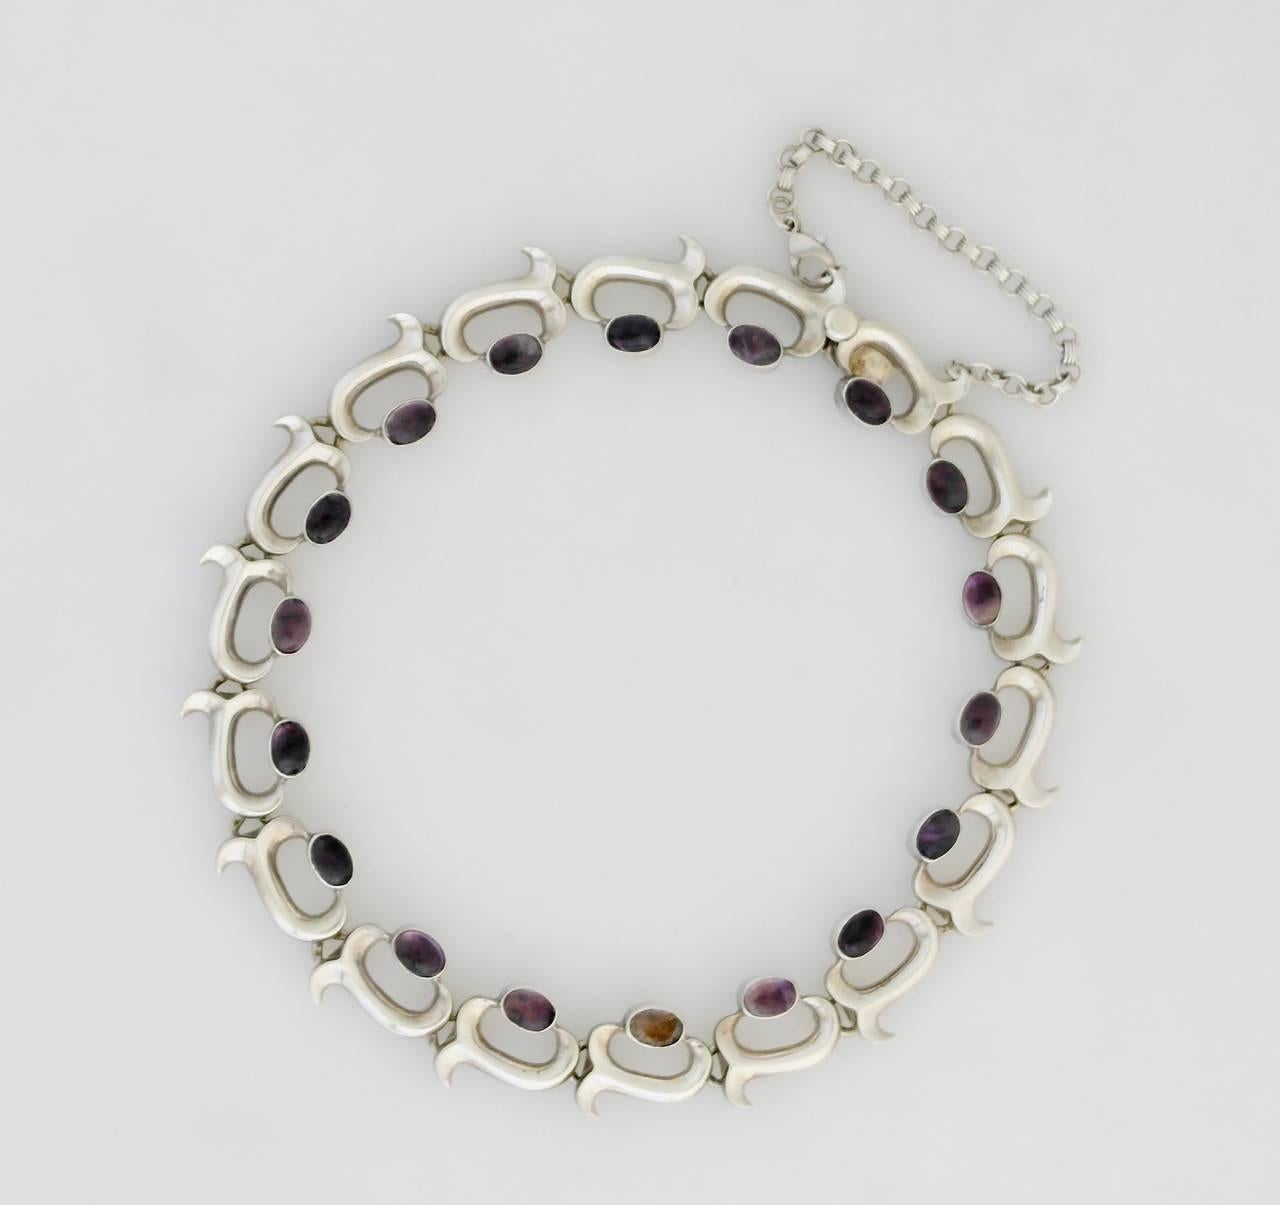 Taxco Amethyst Sterling Silver Modernist Necklace   In Excellent Condition For Sale In New York, NY